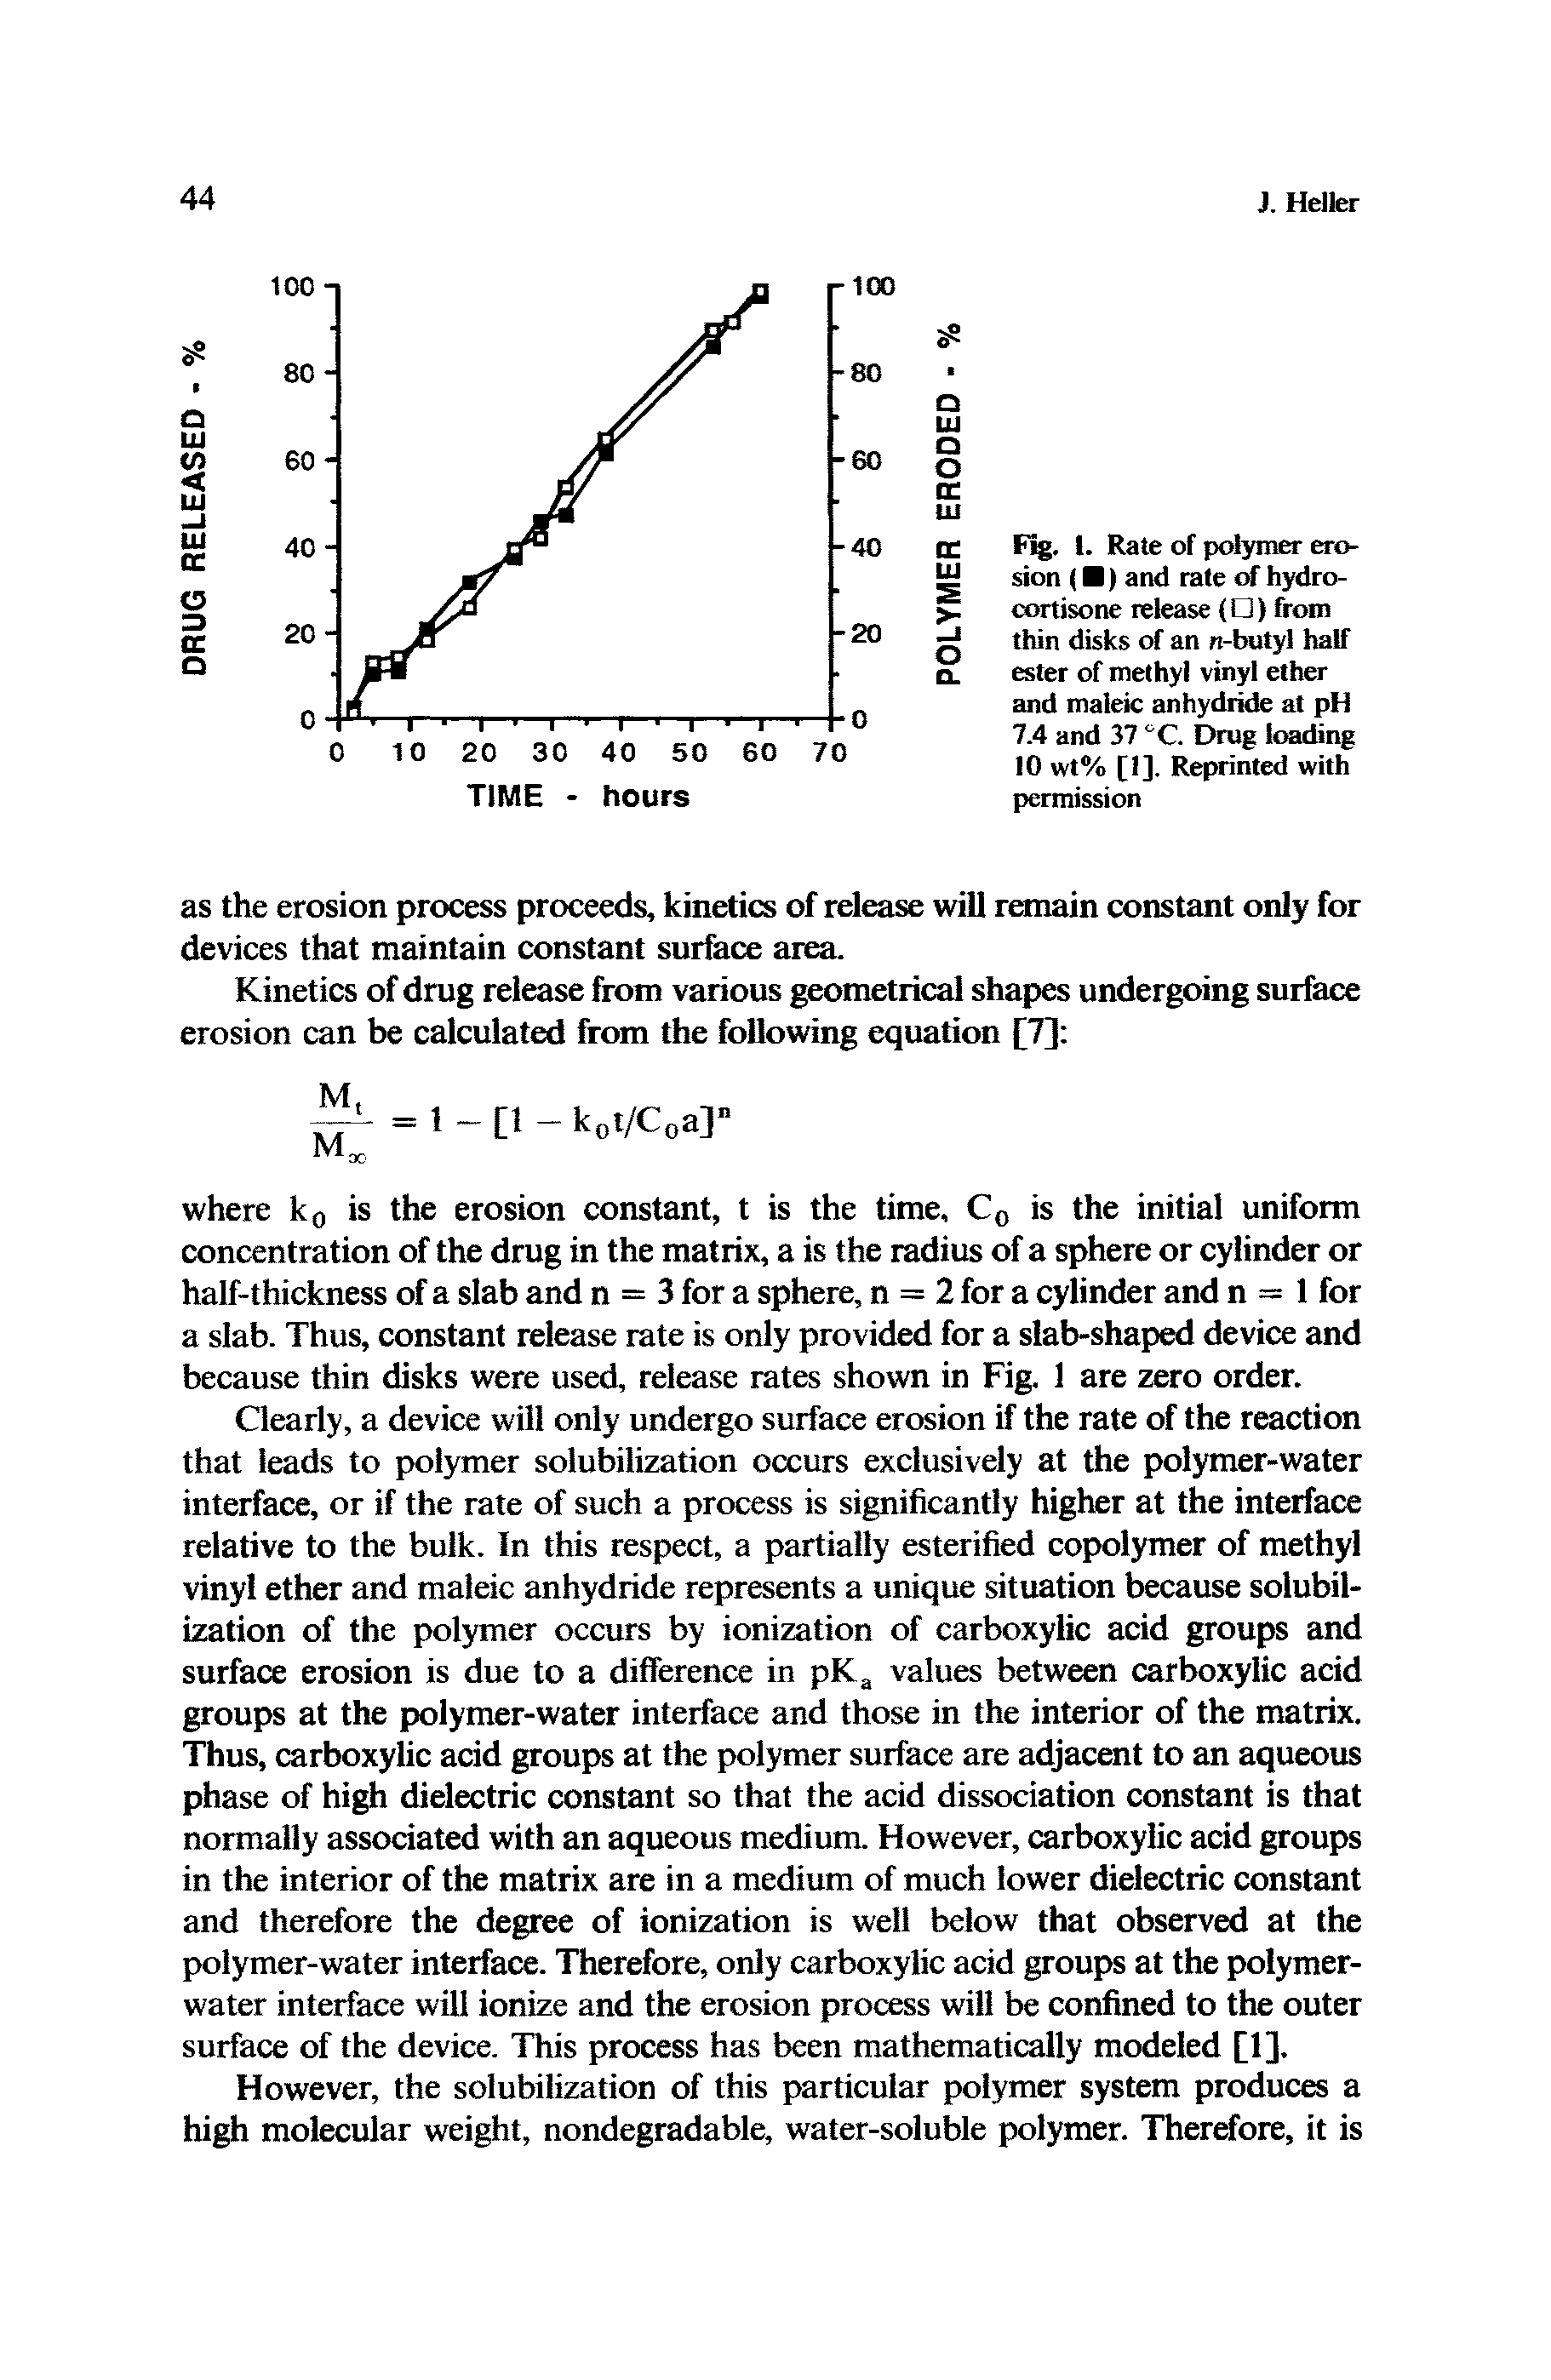 Fig. 1. Rate of polymer erosion ( ) and rate of hydrocortisone release ( ) from thin disks of an n-butyl half ester of methyl vinyl ether and maleic anhydride at pH 7.4 and 37 °C. Drug loading 10 wt% [1], Reprinted with permission...